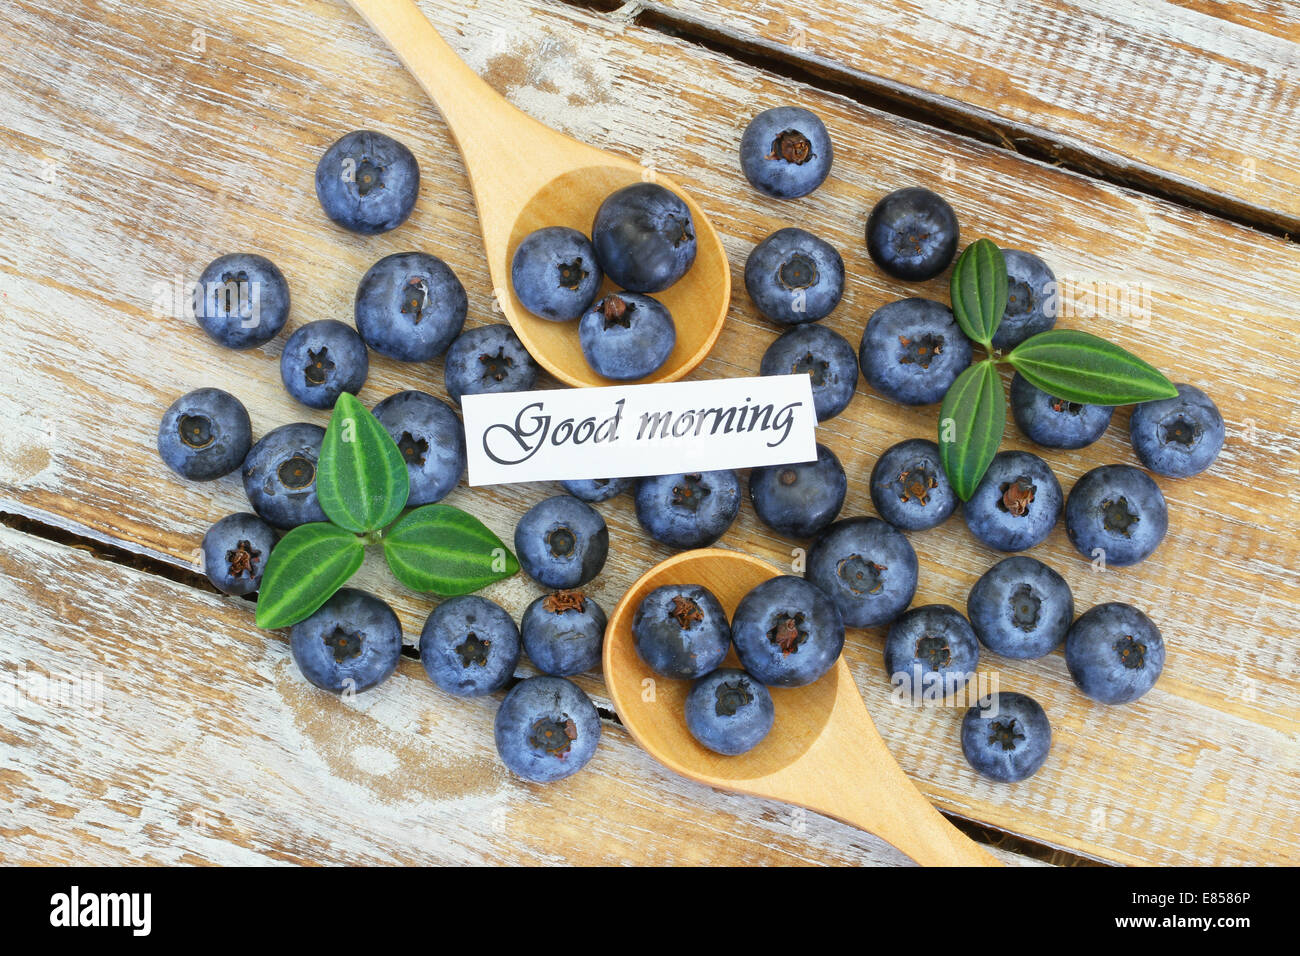 Good morning card with blueberries Stock Photo